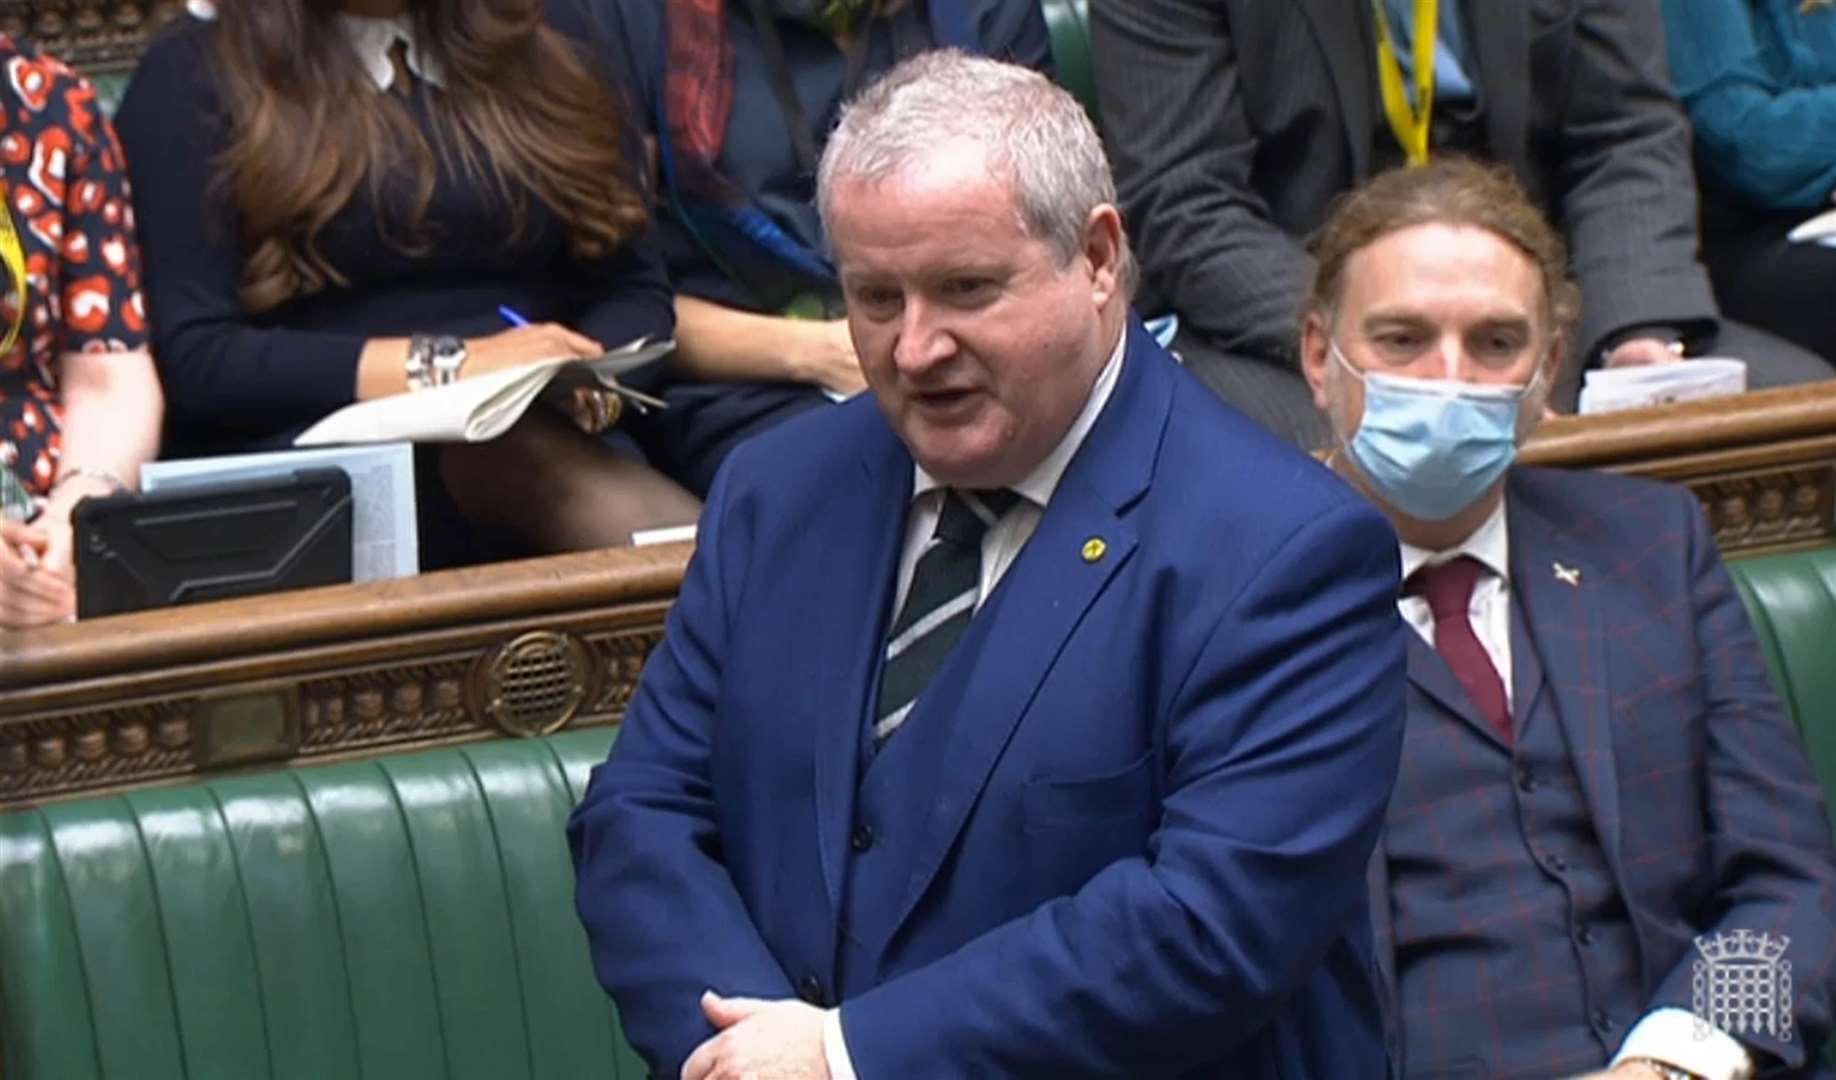 SNP Westminster leader Ian Blackford speaks during Prime Minister’s Questions (House of Commons/PA)